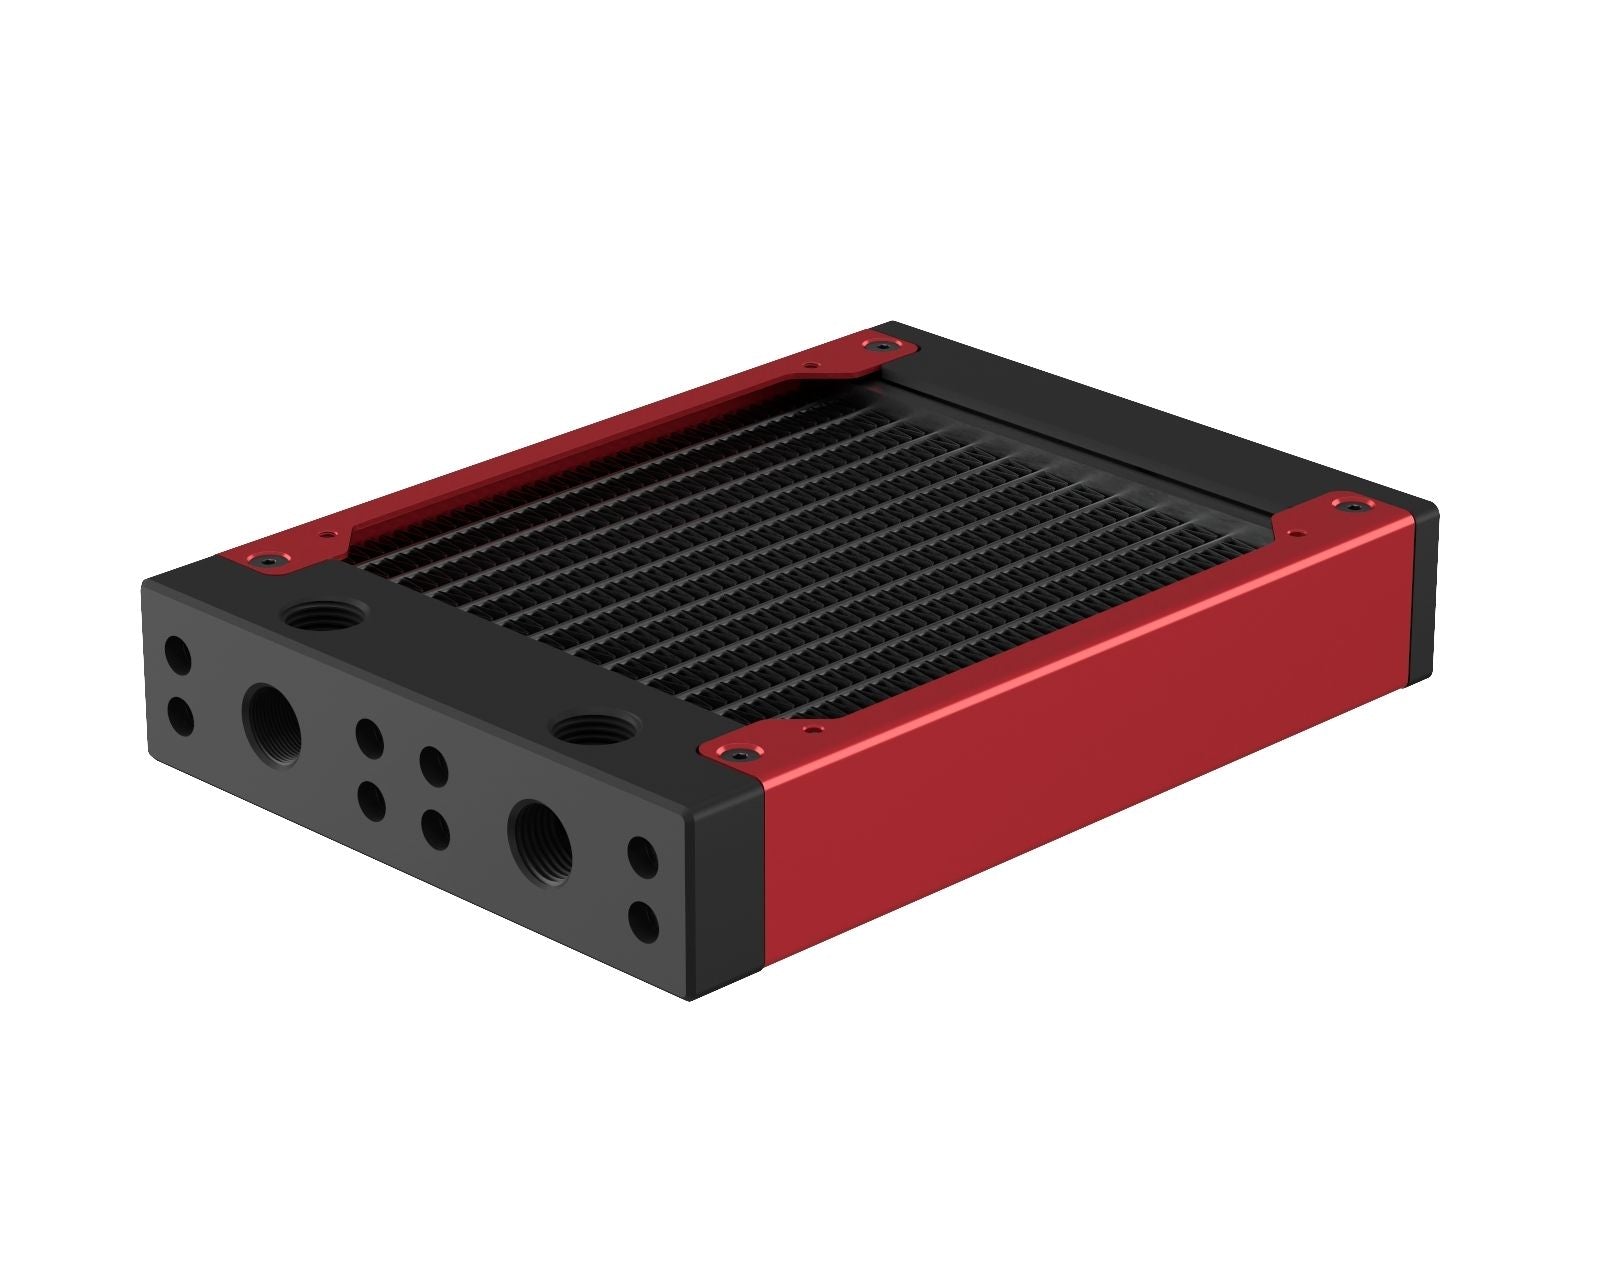 PrimoChill 120SL (30mm) EXIMO Modular Radiator, Black POM, 1x120mm, Single Fan (R-SL-BK12) Available in 20+ Colors, Assembled in USA and Custom Watercooling Loop Ready - Candy Red